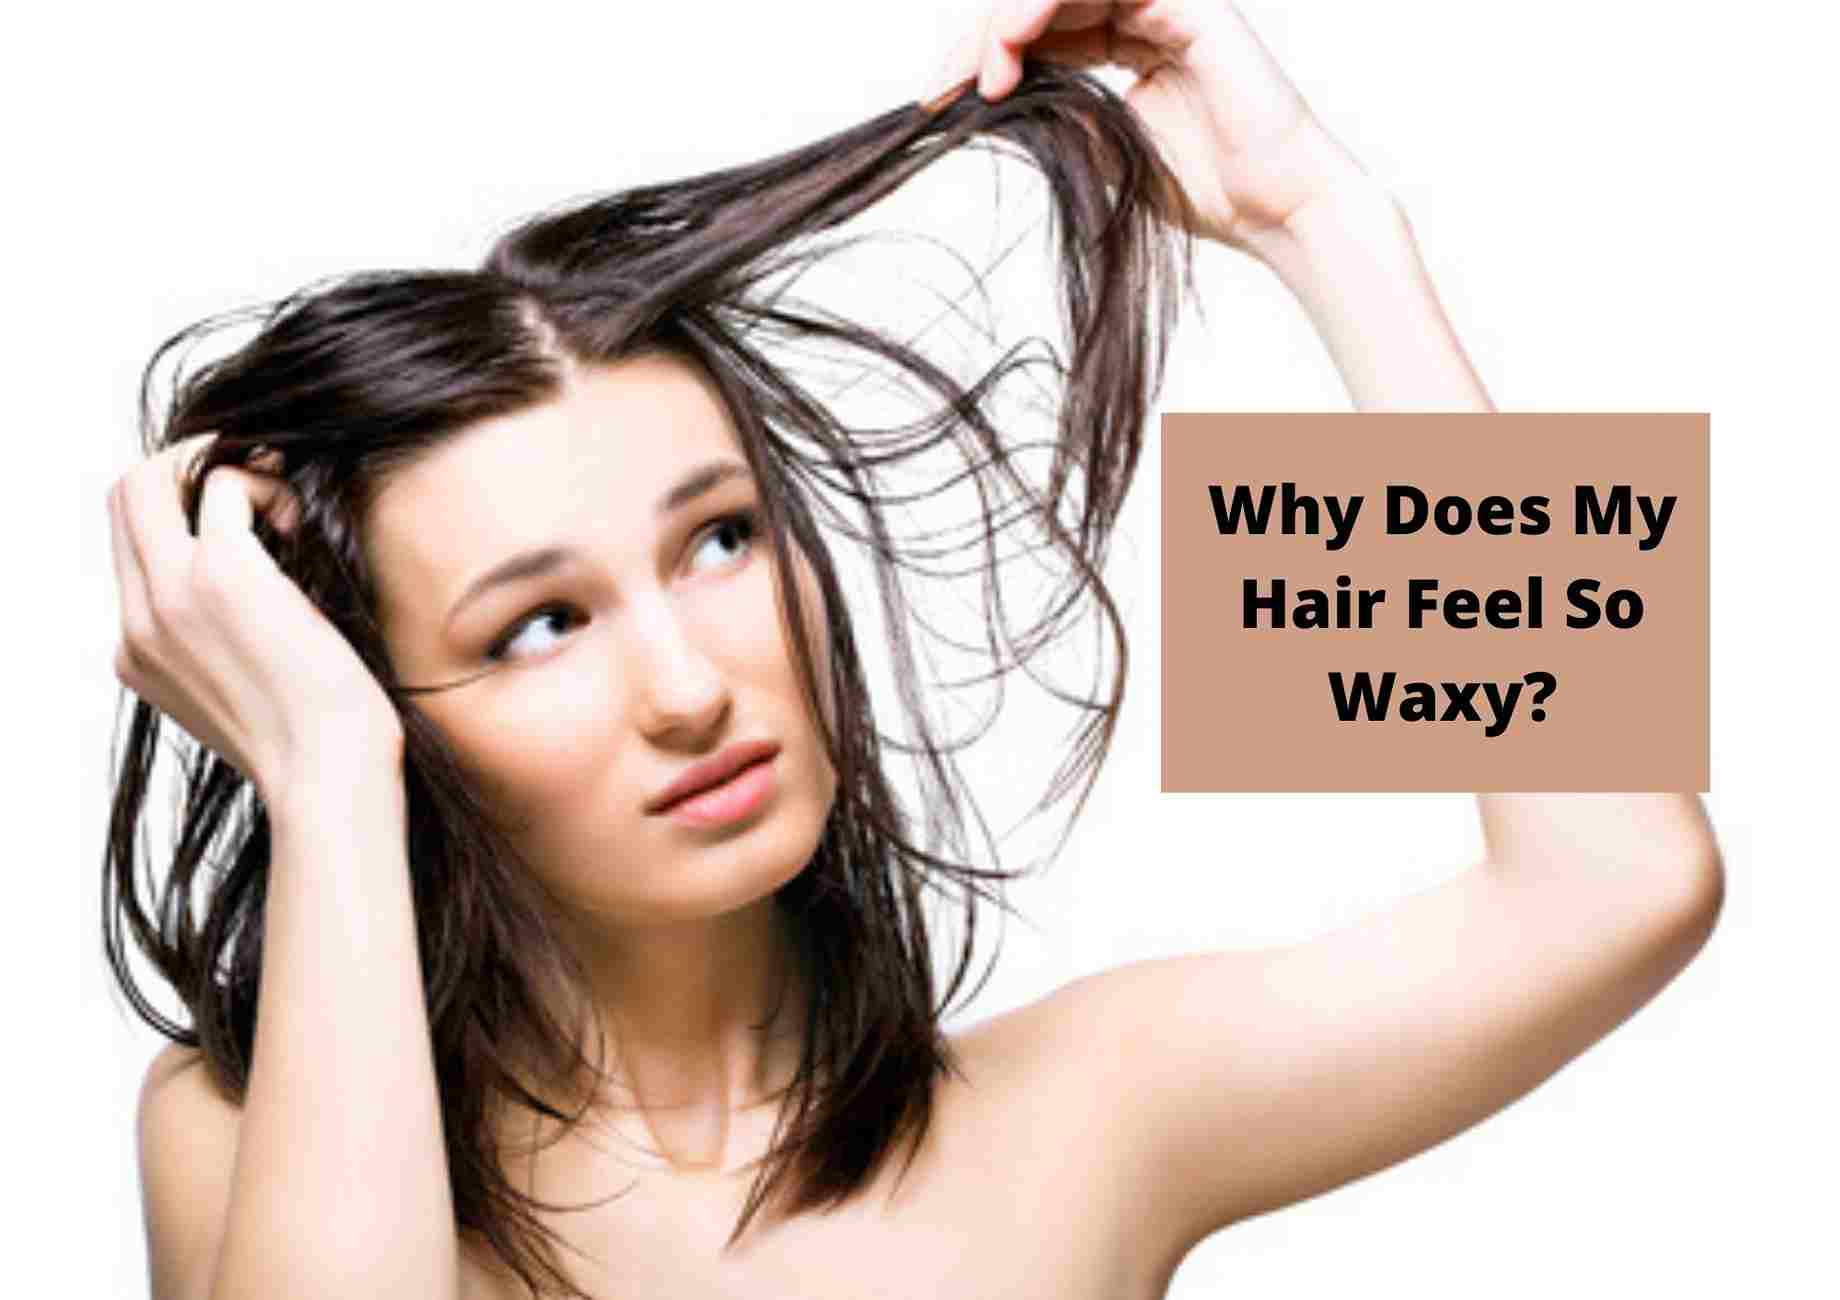 Why Does My Hair Feel Waxy 2022 | How Do I Fix This? - Hair Everyday Review